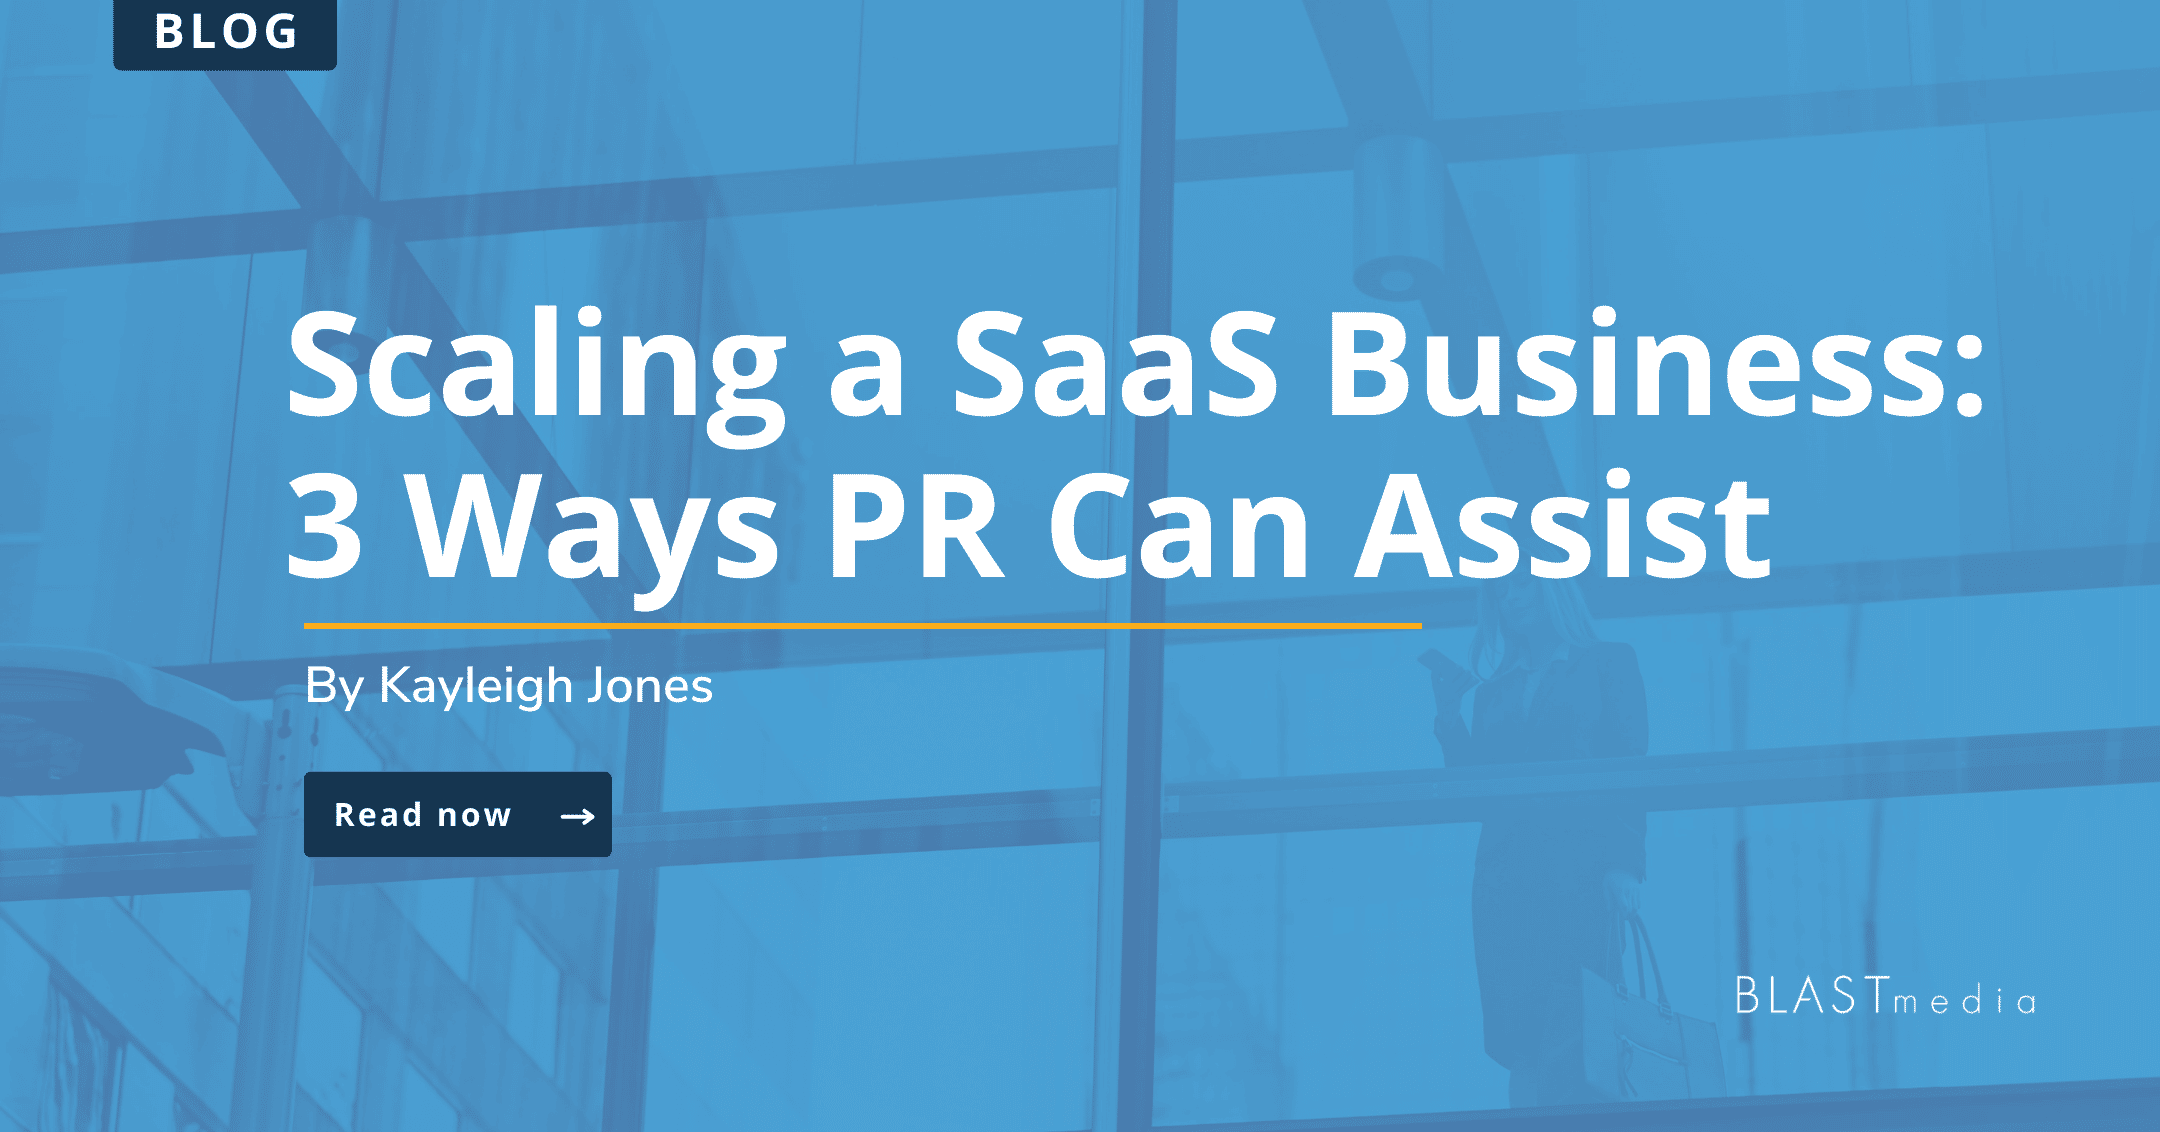 Scaling a SaaS Business: 3 Ways PR Can Assist